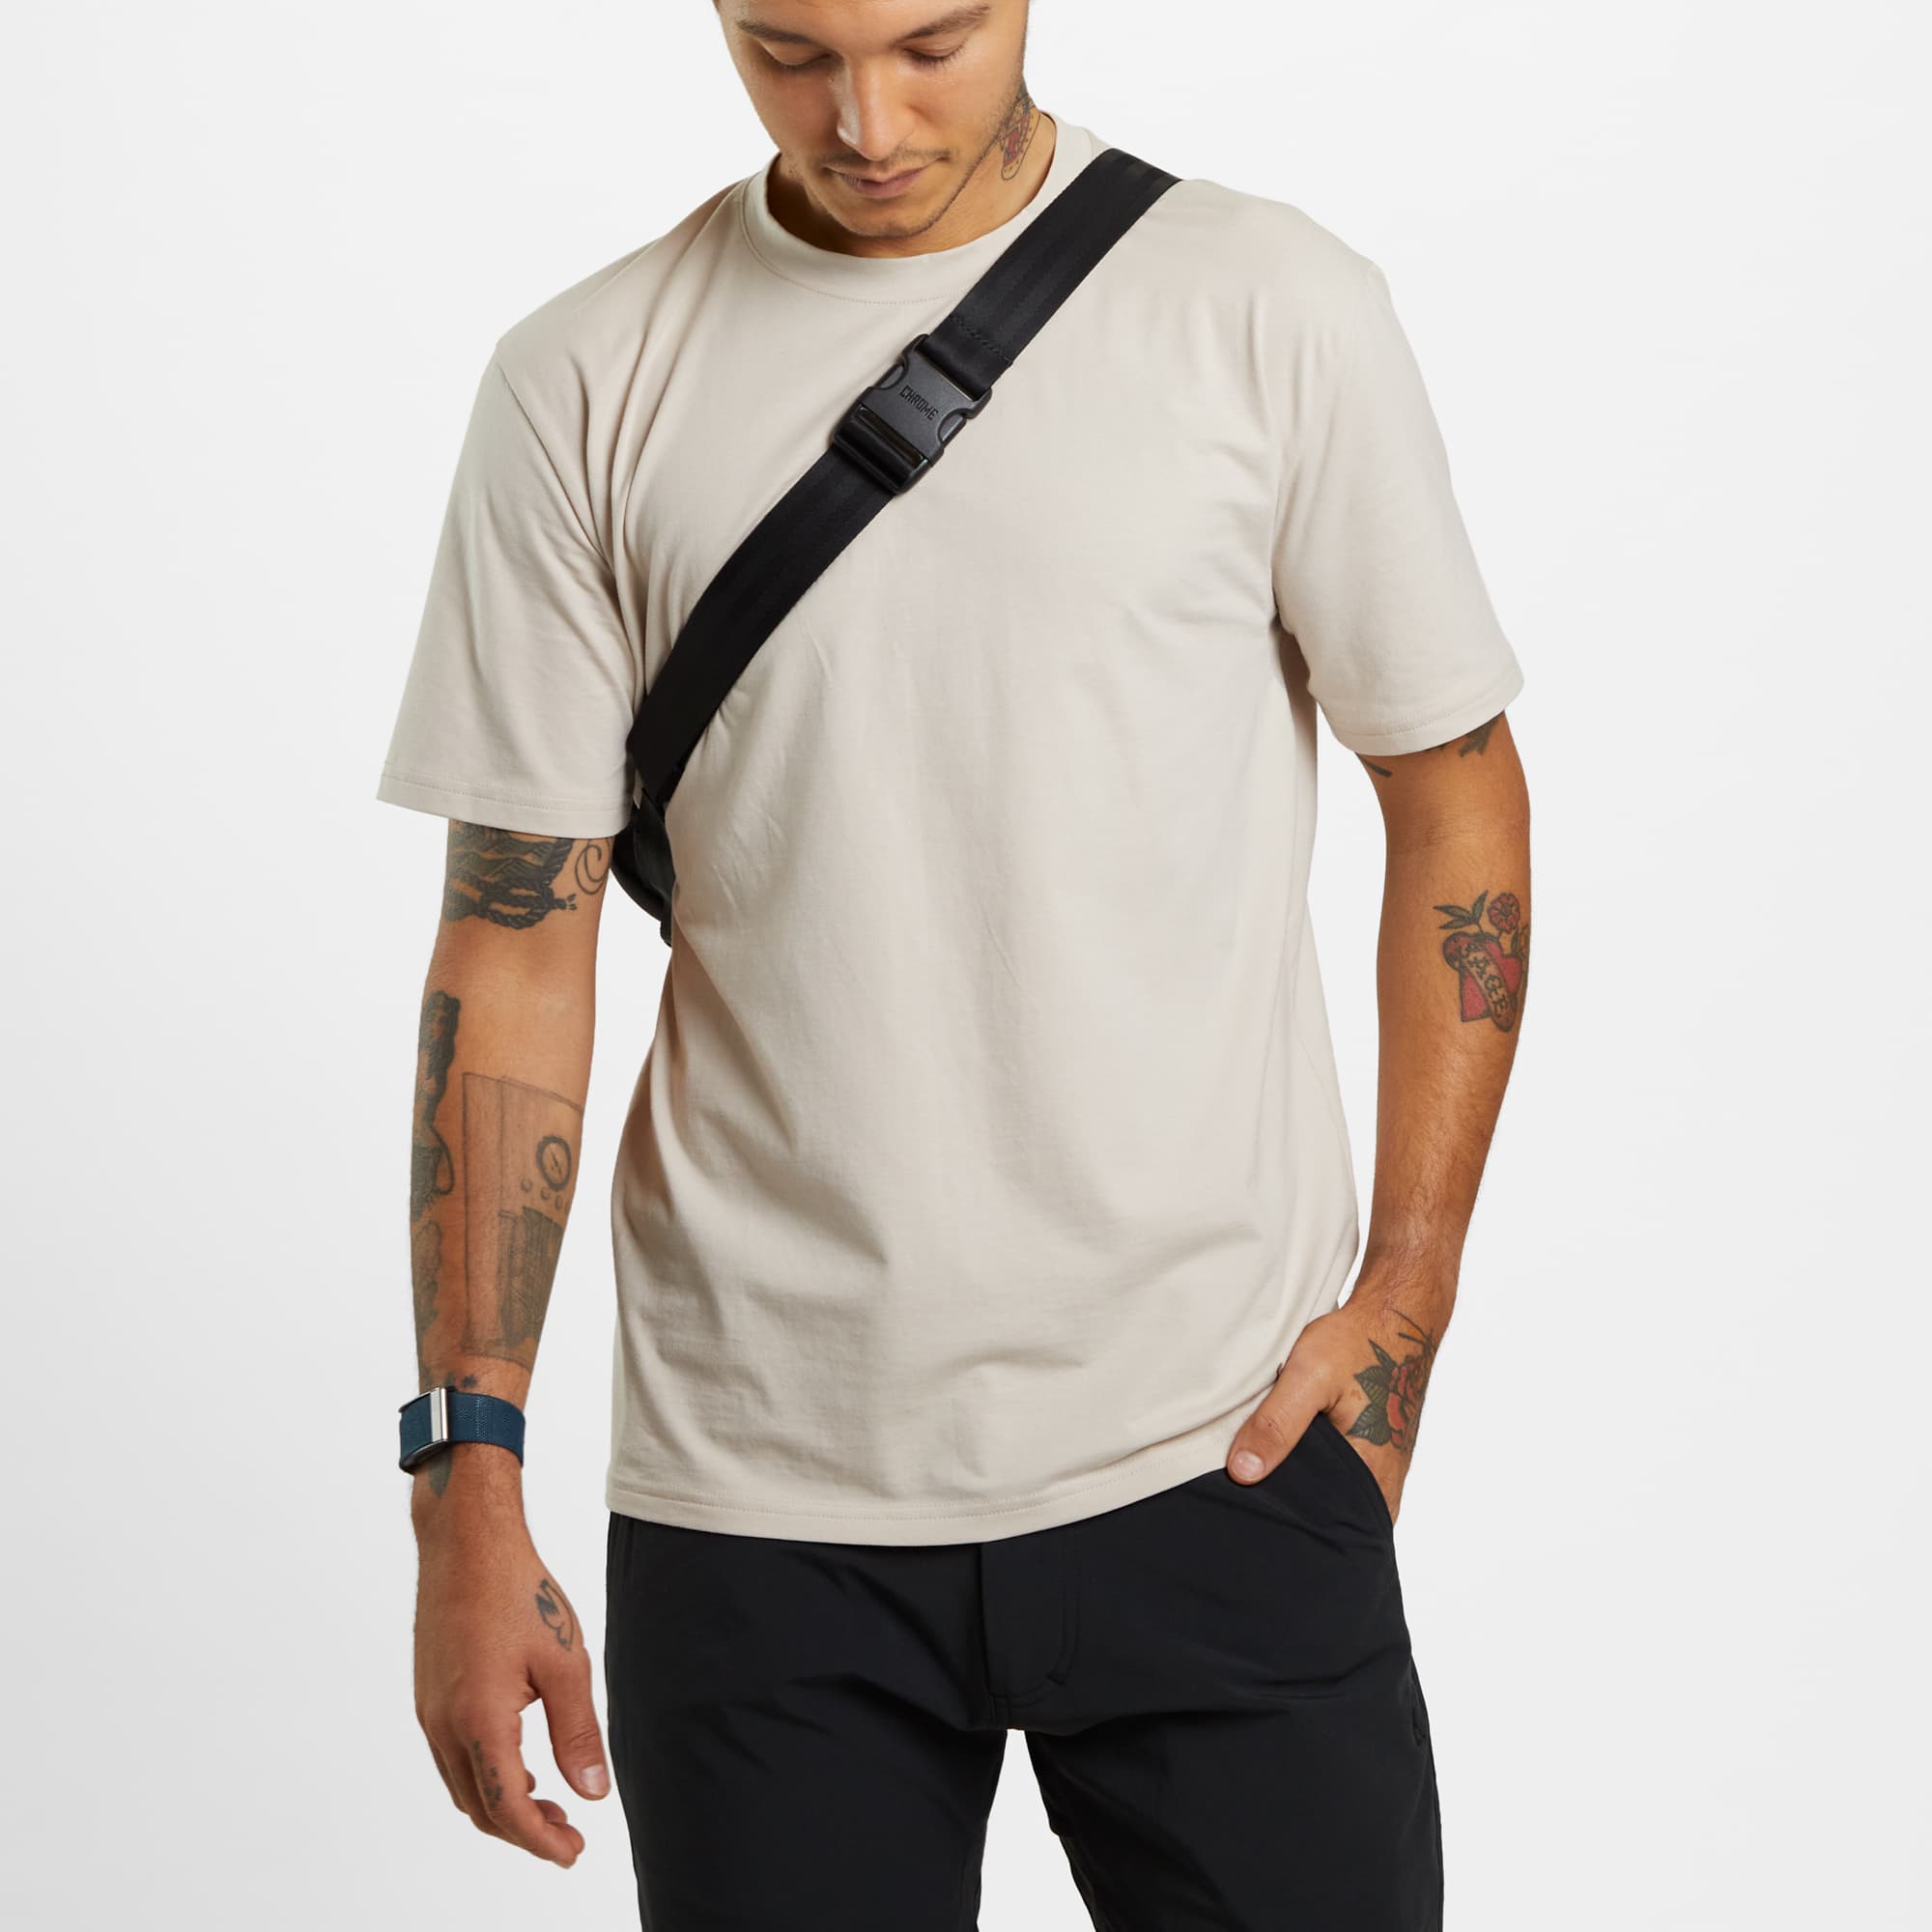 Medium size frame bag worn as a sling on a man front view 